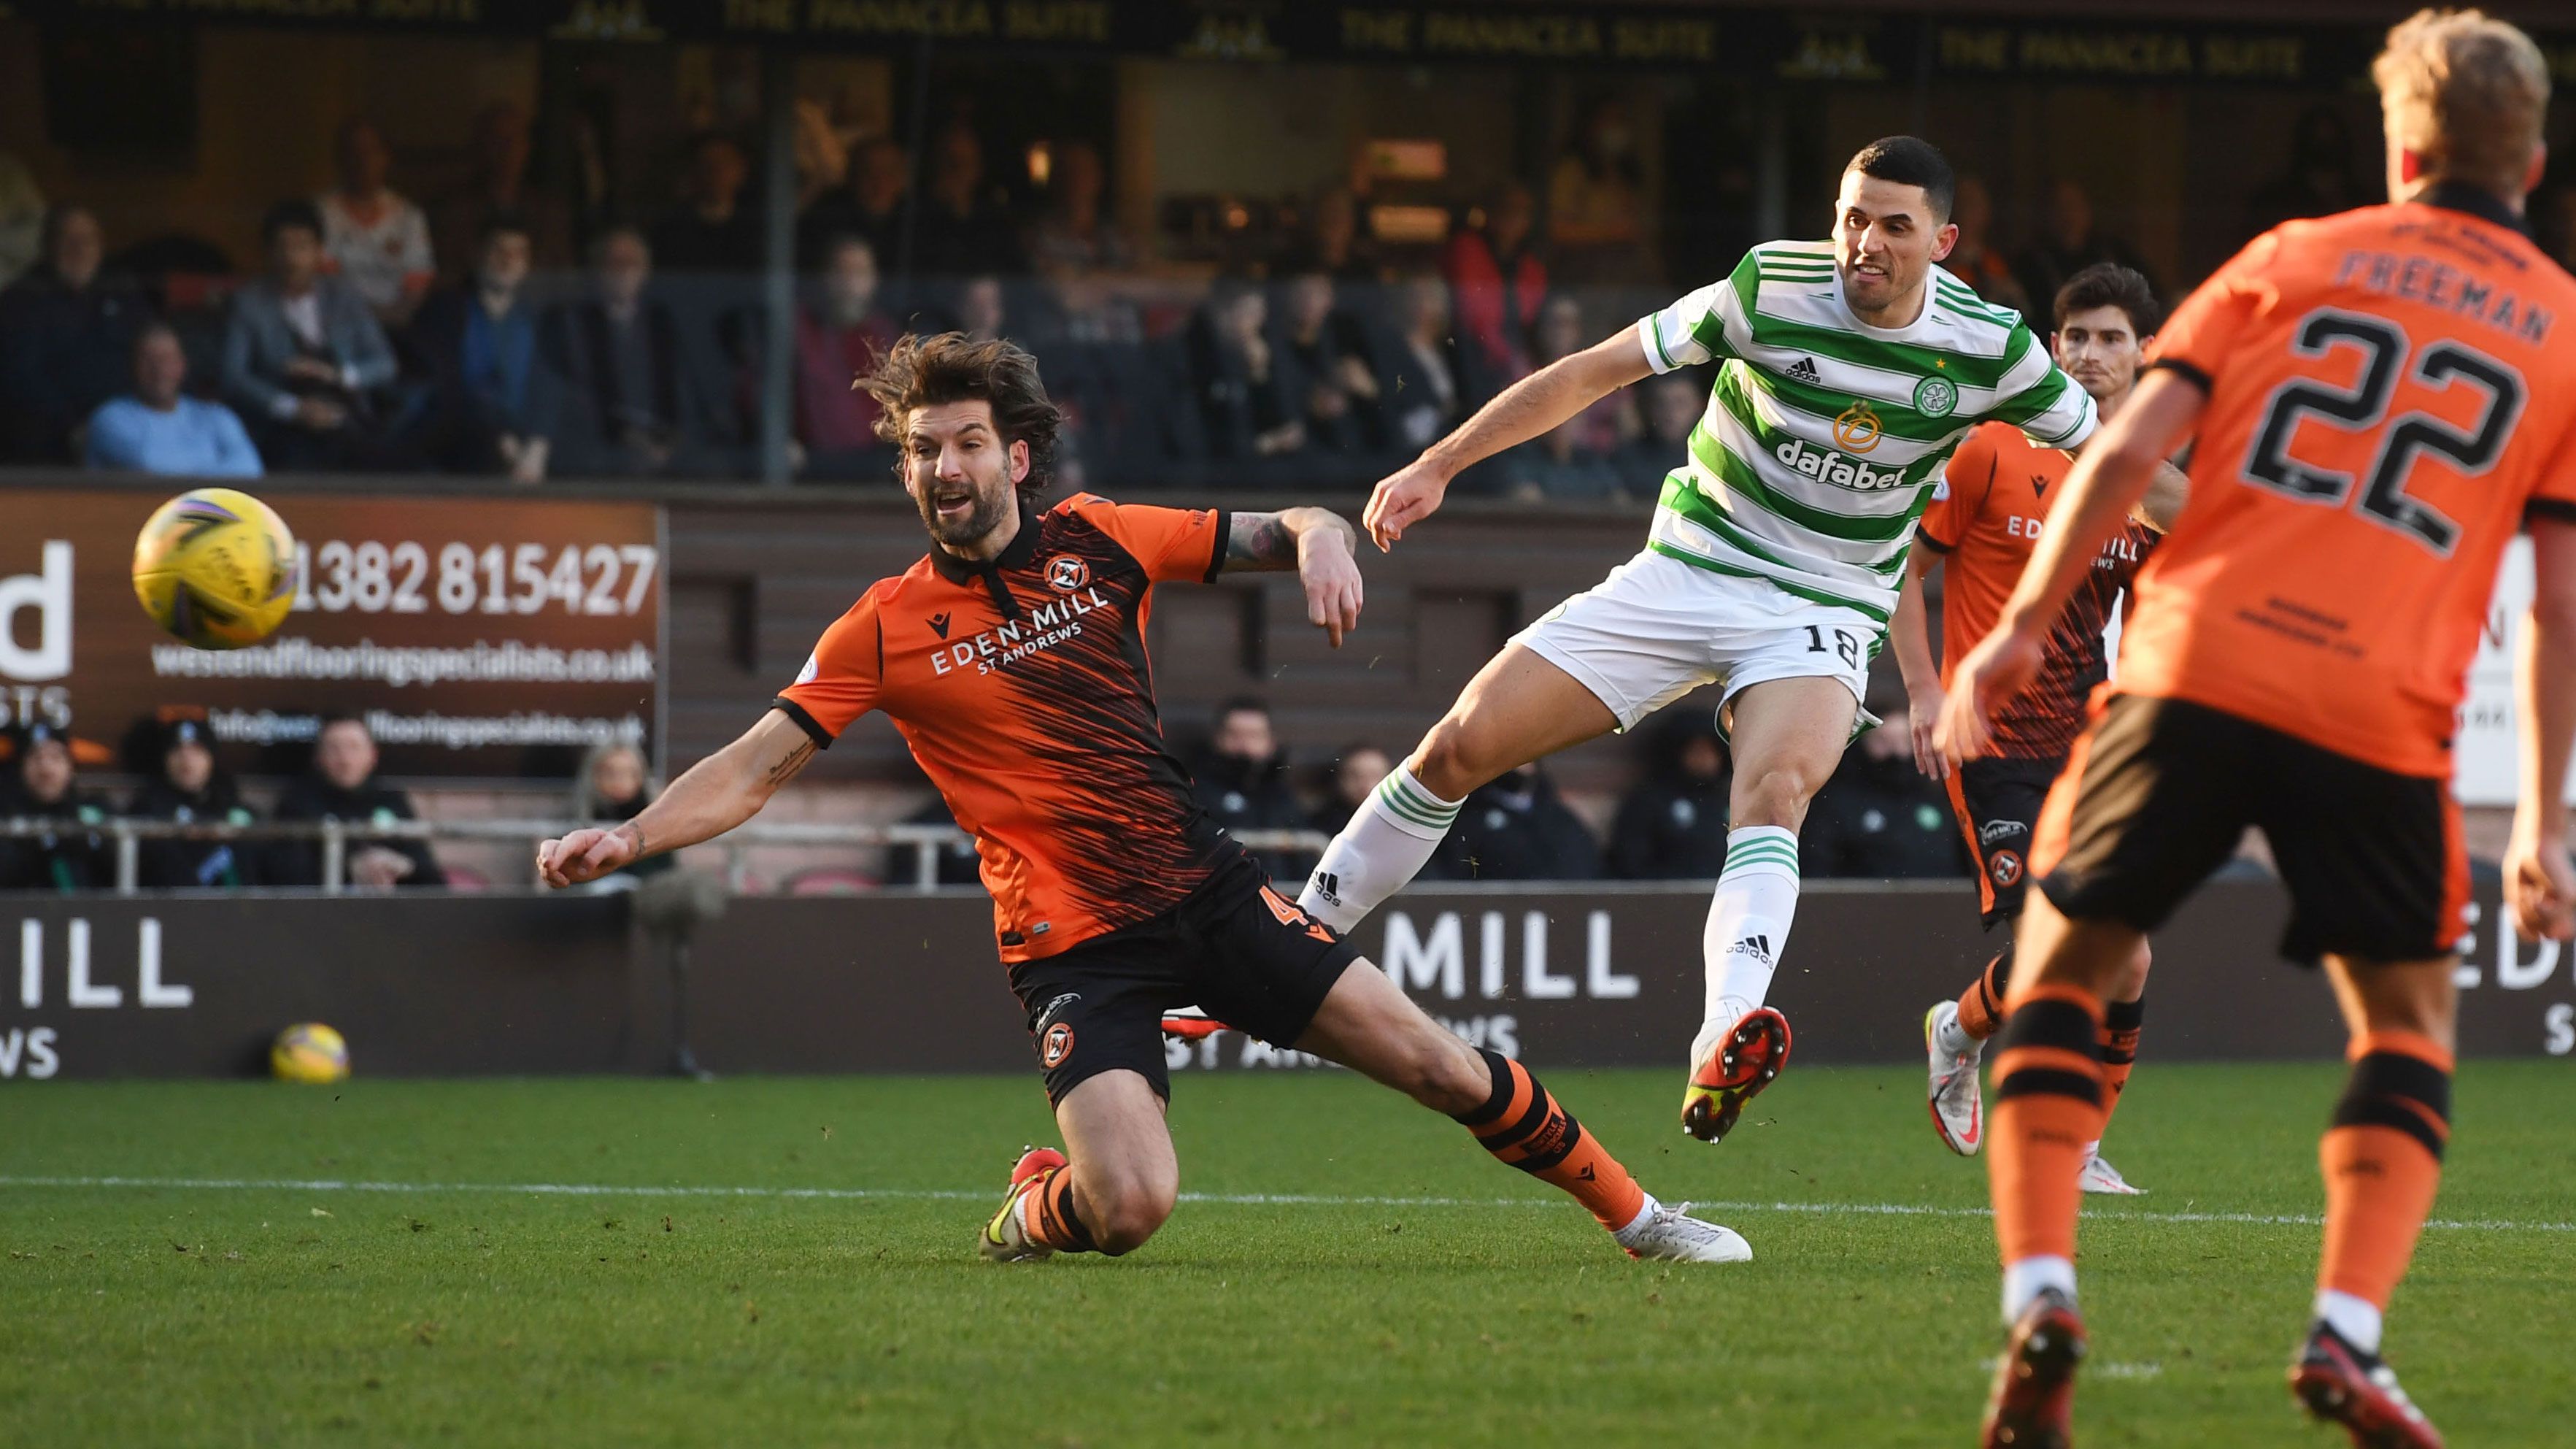 Tom Rogic makes it 1-0 to Celtic over Dundee United, finishing an unbelievable individual goal with this shot.